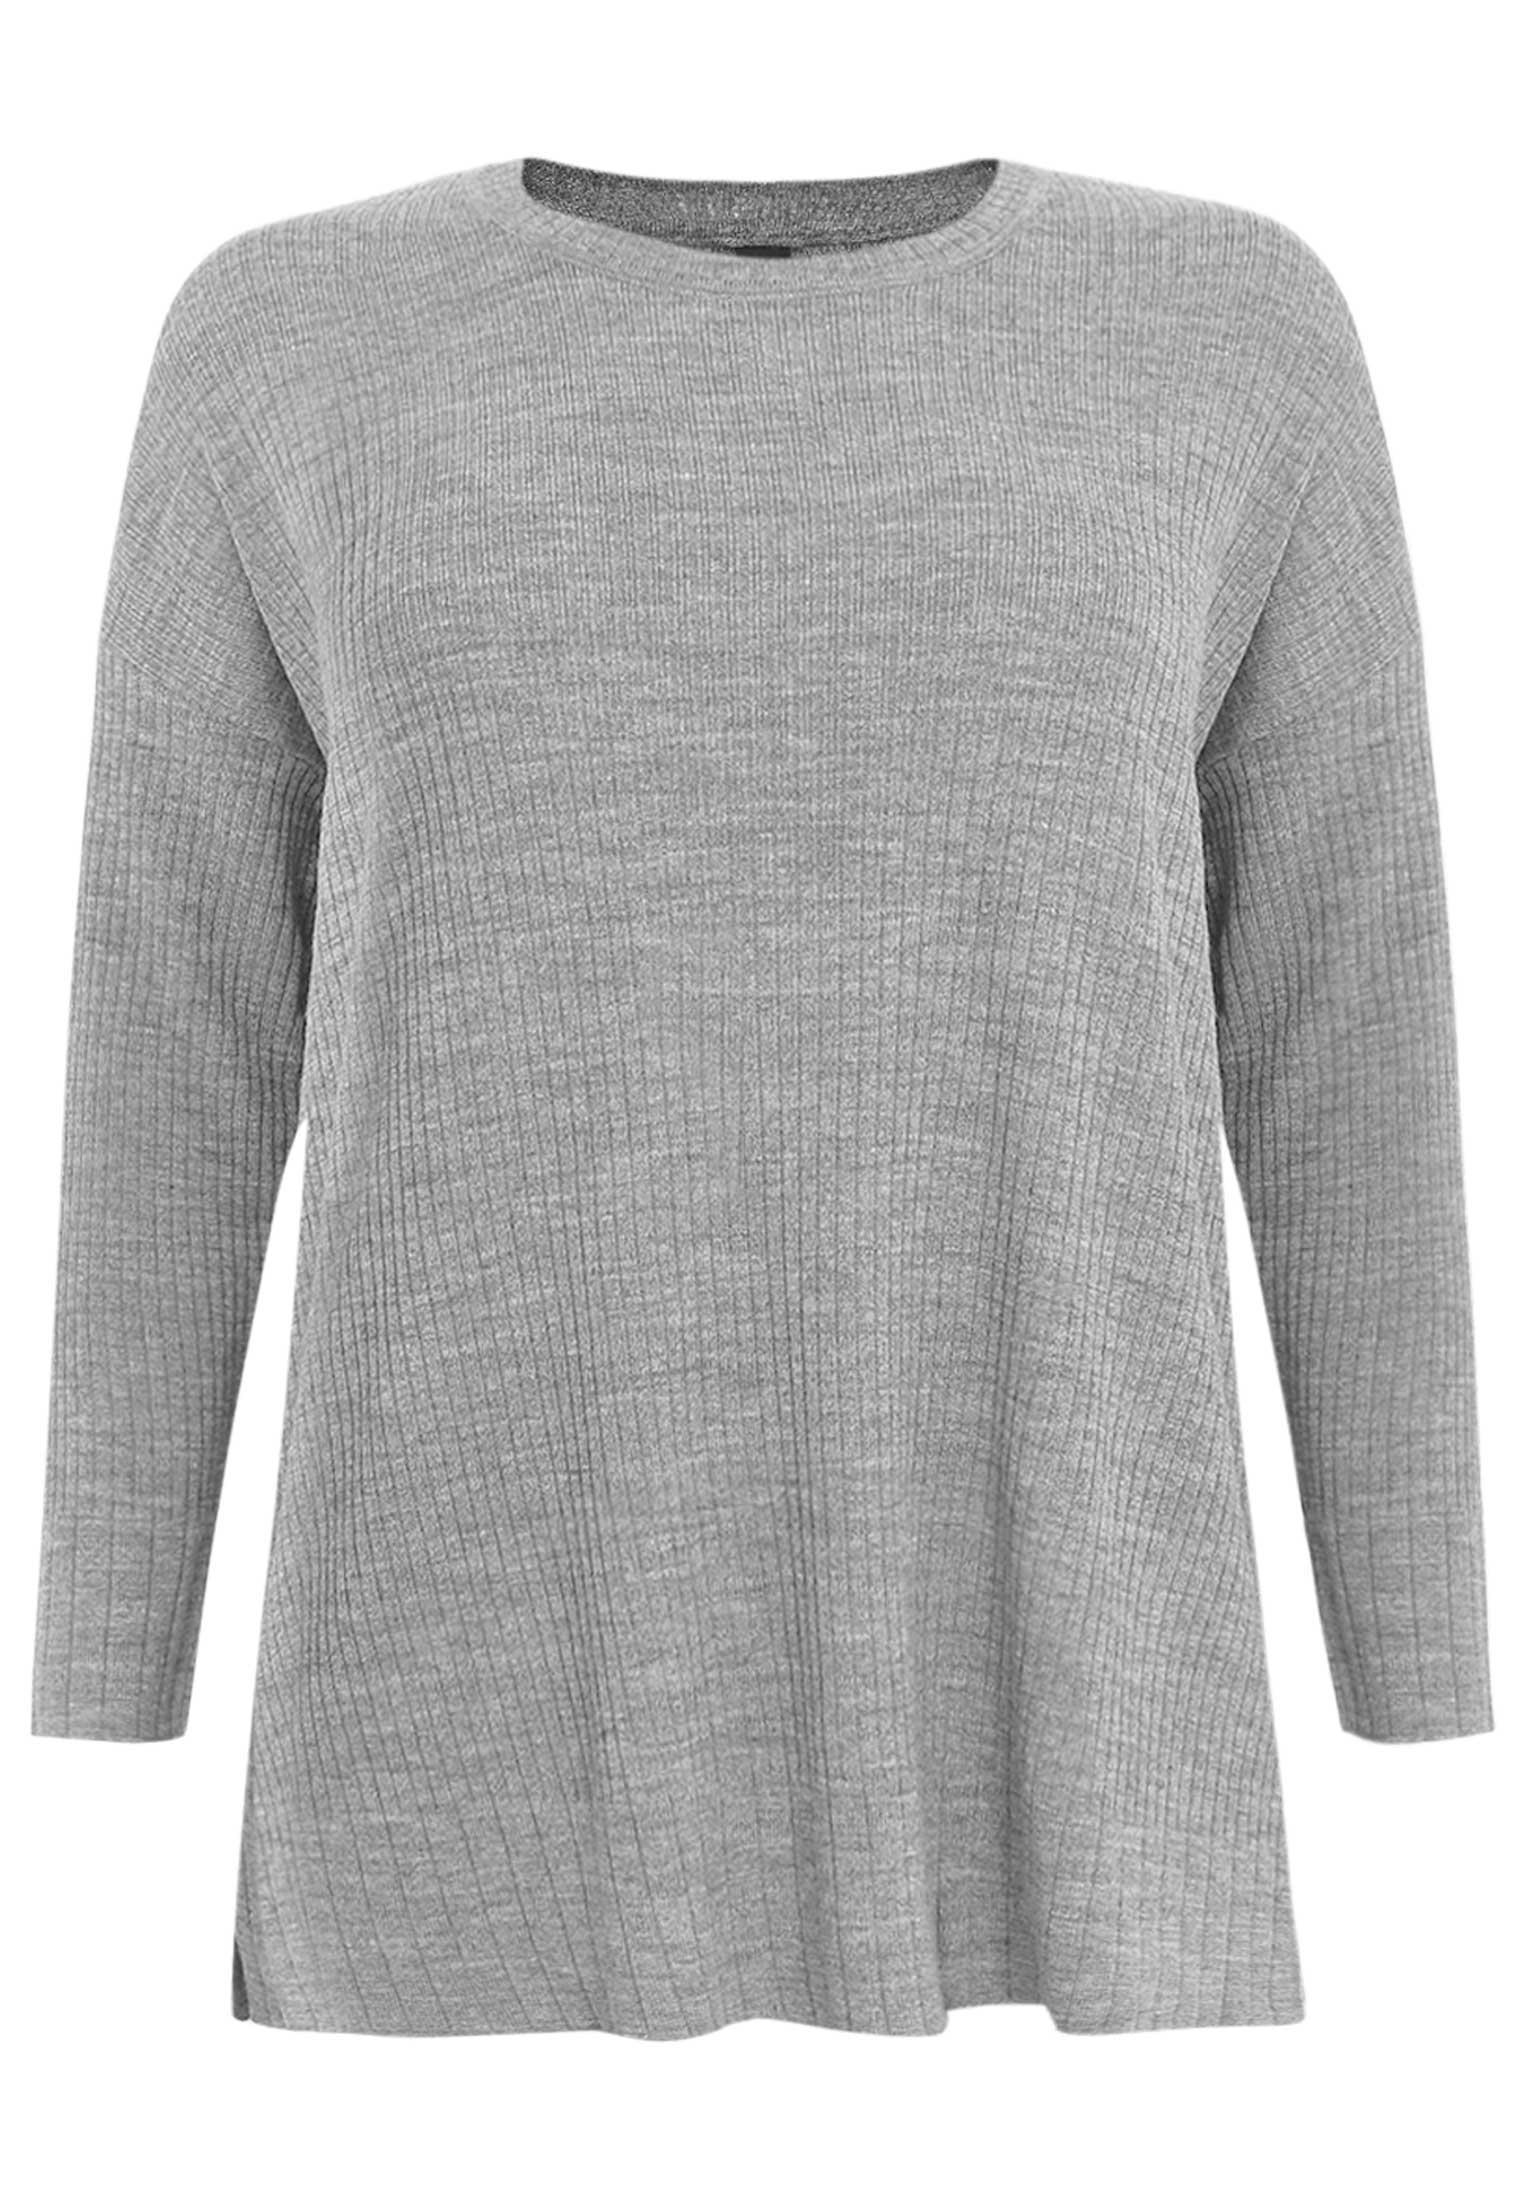 Pullover wide rib LOUNGE - grey 